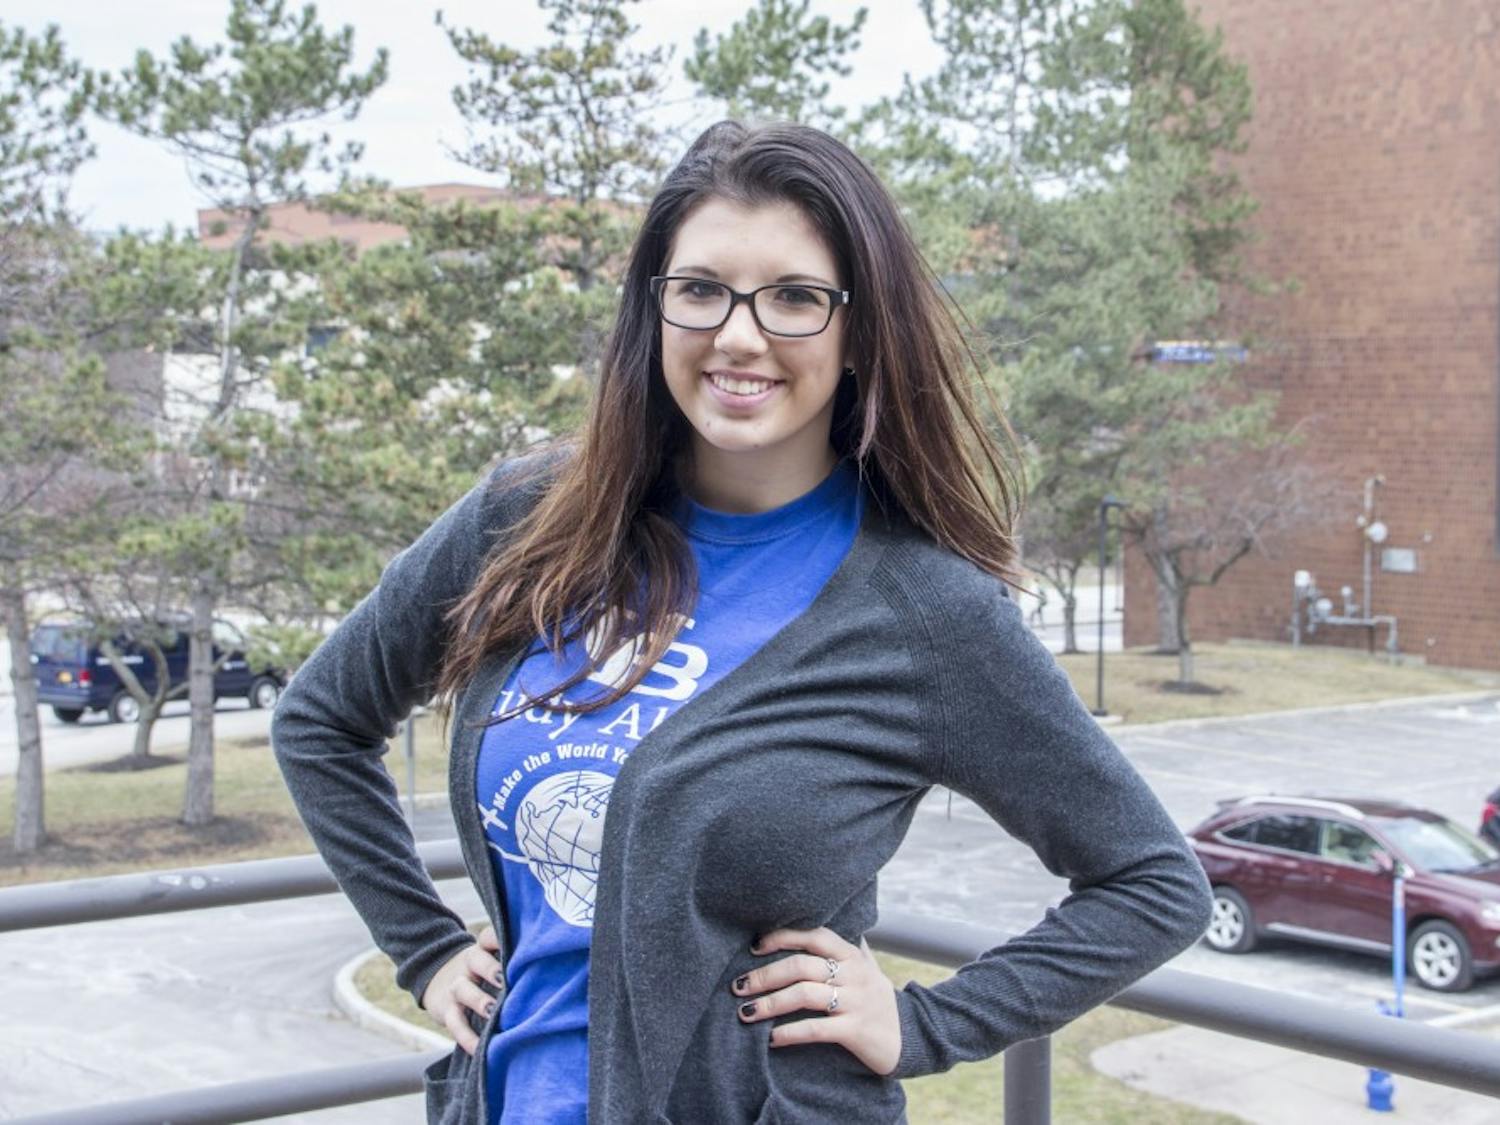 Kristie Norton (pictured)&nbsp;has been performing with The Royal Pitches, UB’s all-female a cappella group, since her freshman year. Since auditioning during the spring semester of her first year at UB, Norton has continued her passion of music through performing with the group.